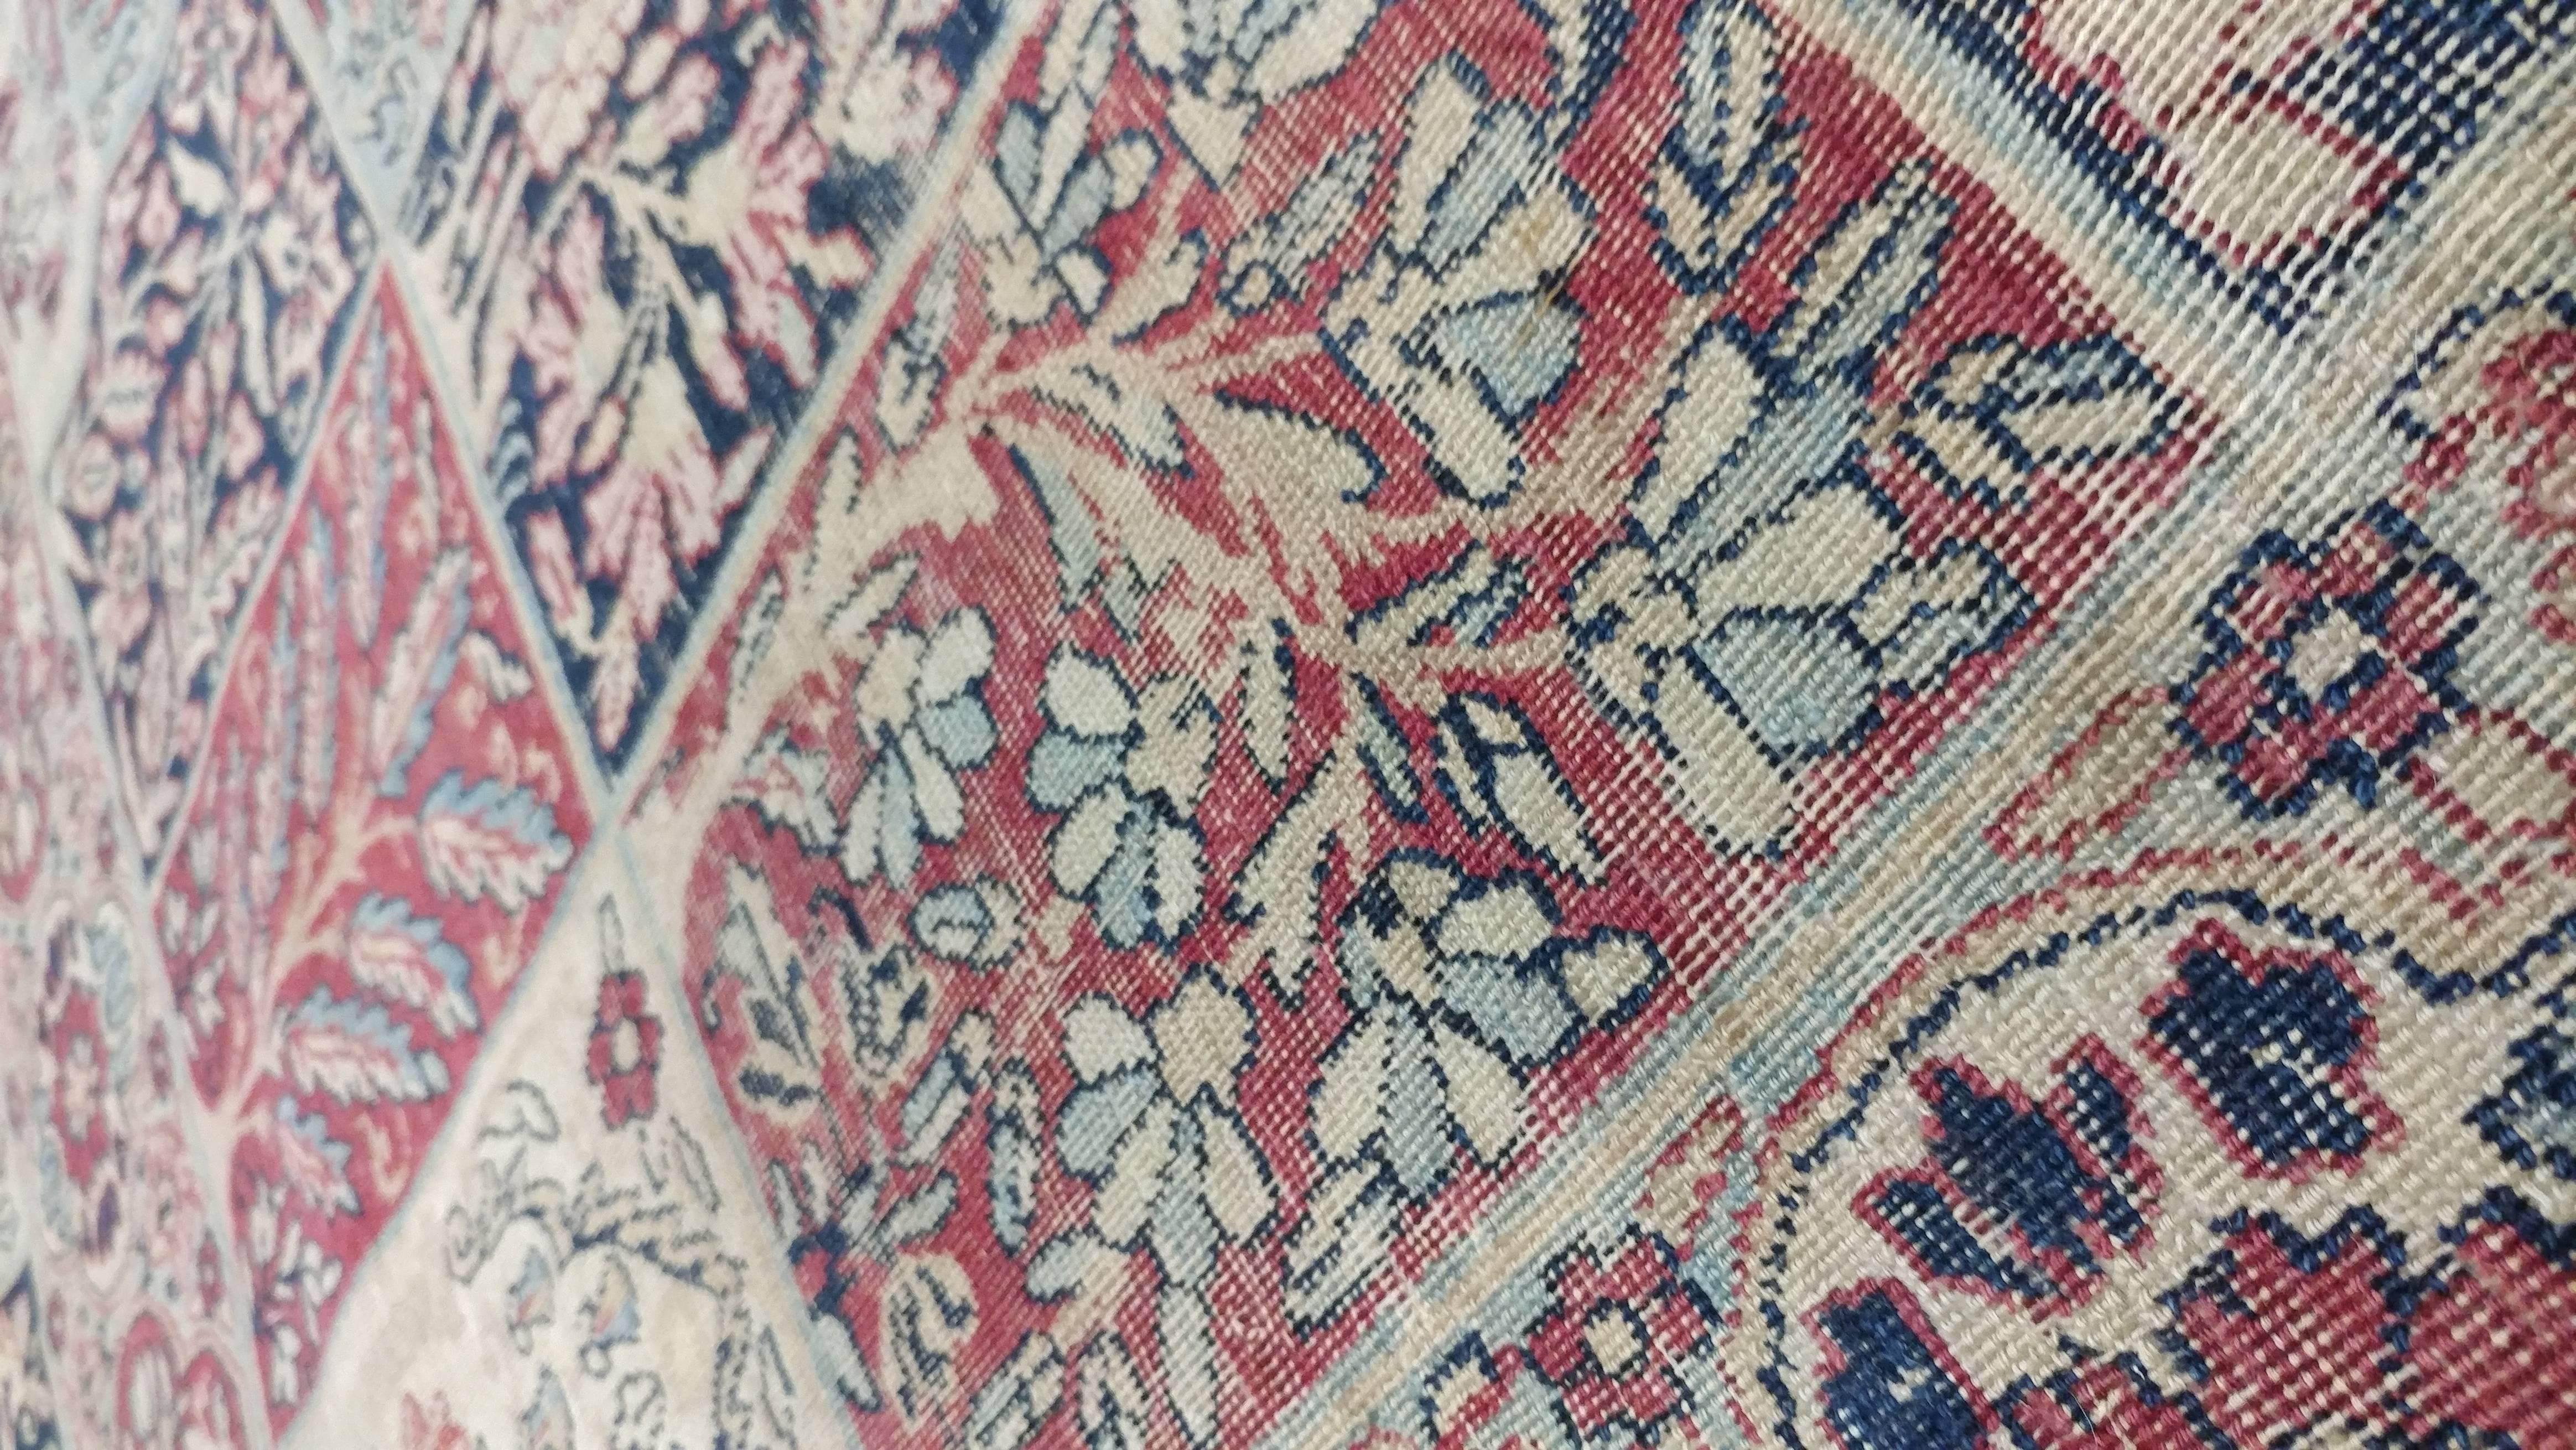 Antique Lavar Kerman Carpet, Handmade Wool Carpet, Multi-Color, Ivory, Red Wine In Good Condition For Sale In Port Washington, NY